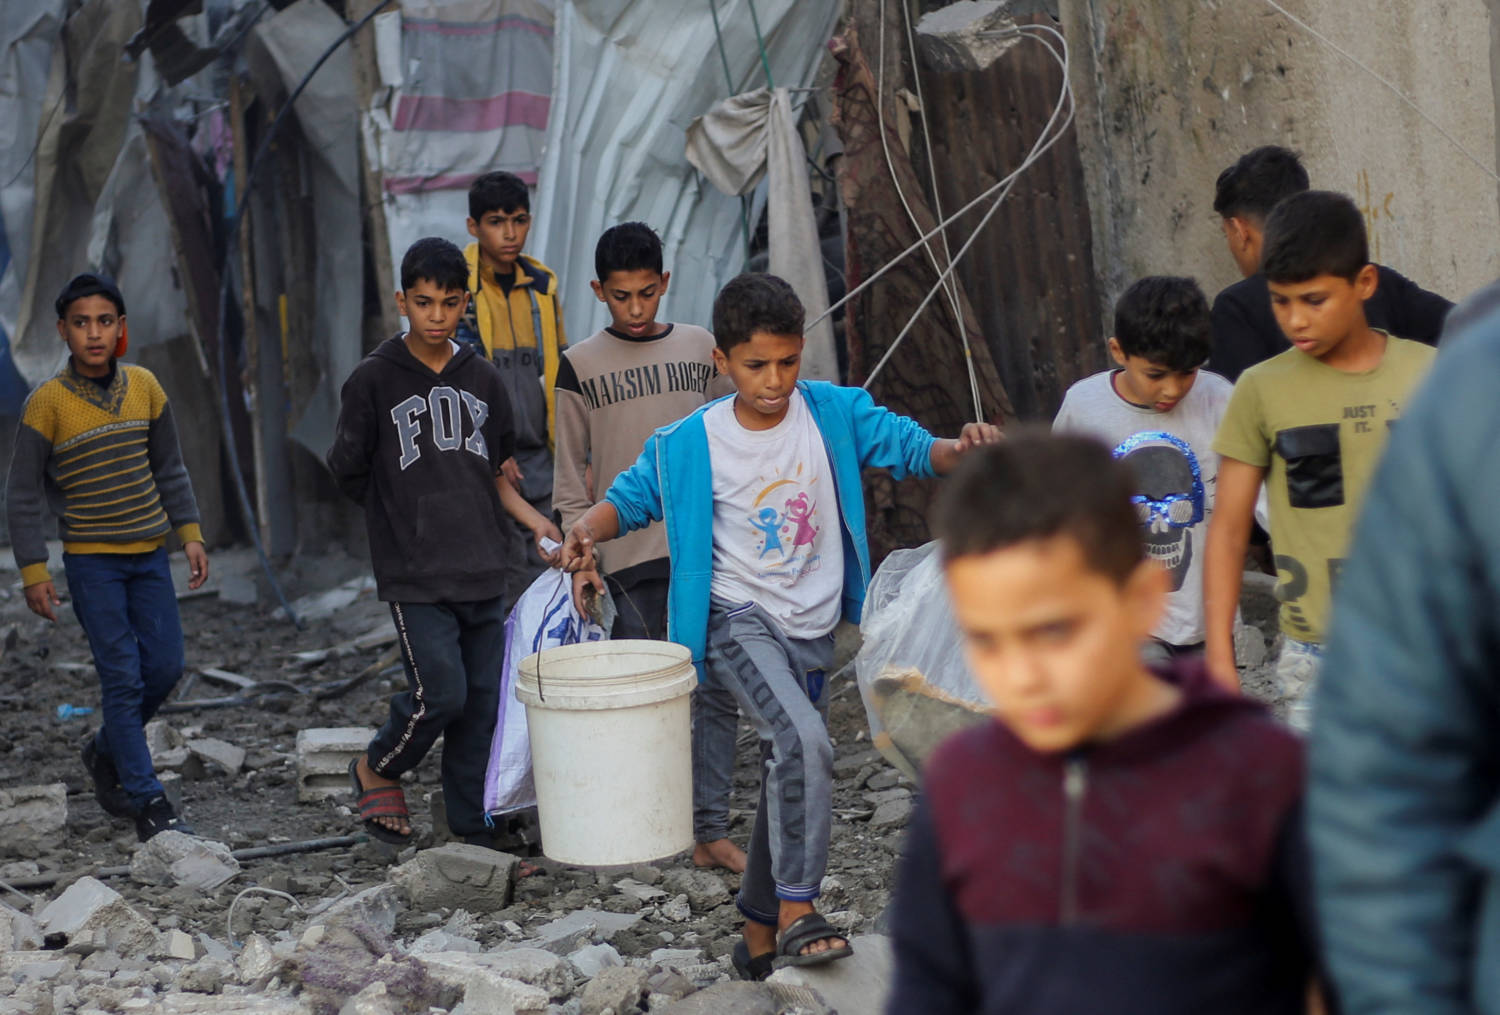 Palestinian Children Carry Items As They Walk At The Site Of Israeli Strikes In Khan Younis